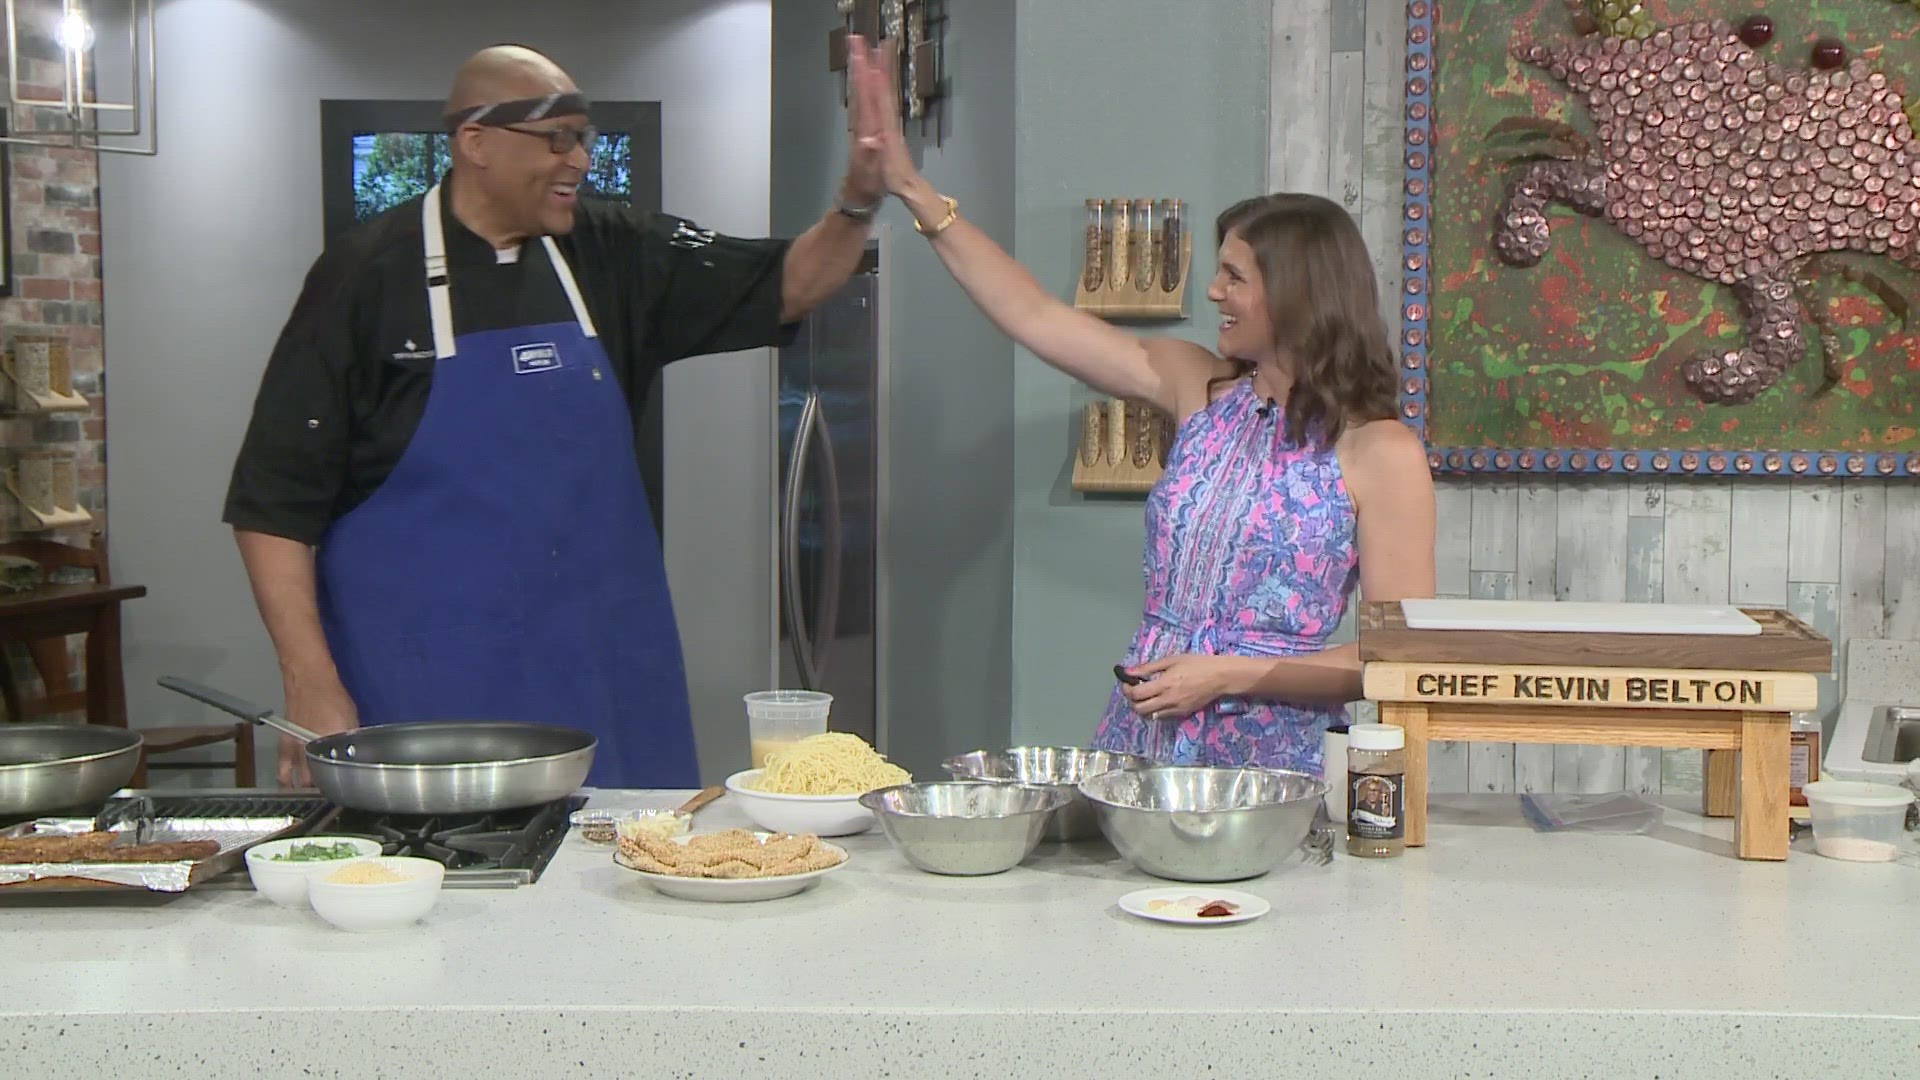 Chef Belton is in the WWLTV kitchen cooking up Pork Chops and Spaghetti Aglio E Olio.